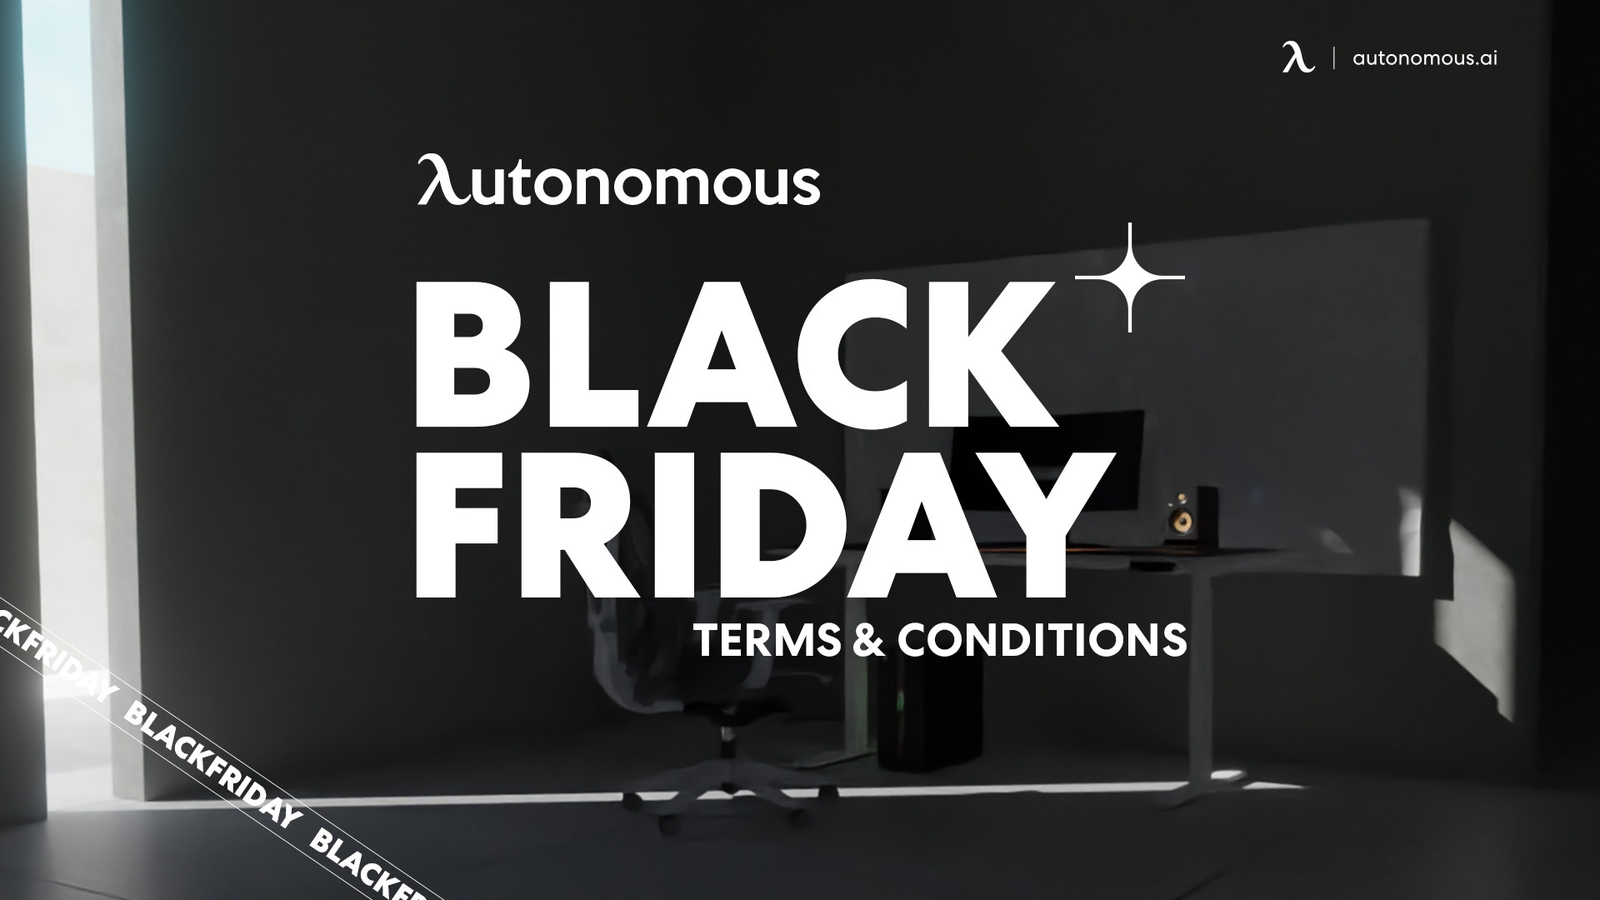 BLACK FRIDAY PROMOTION - Terms and Conditions